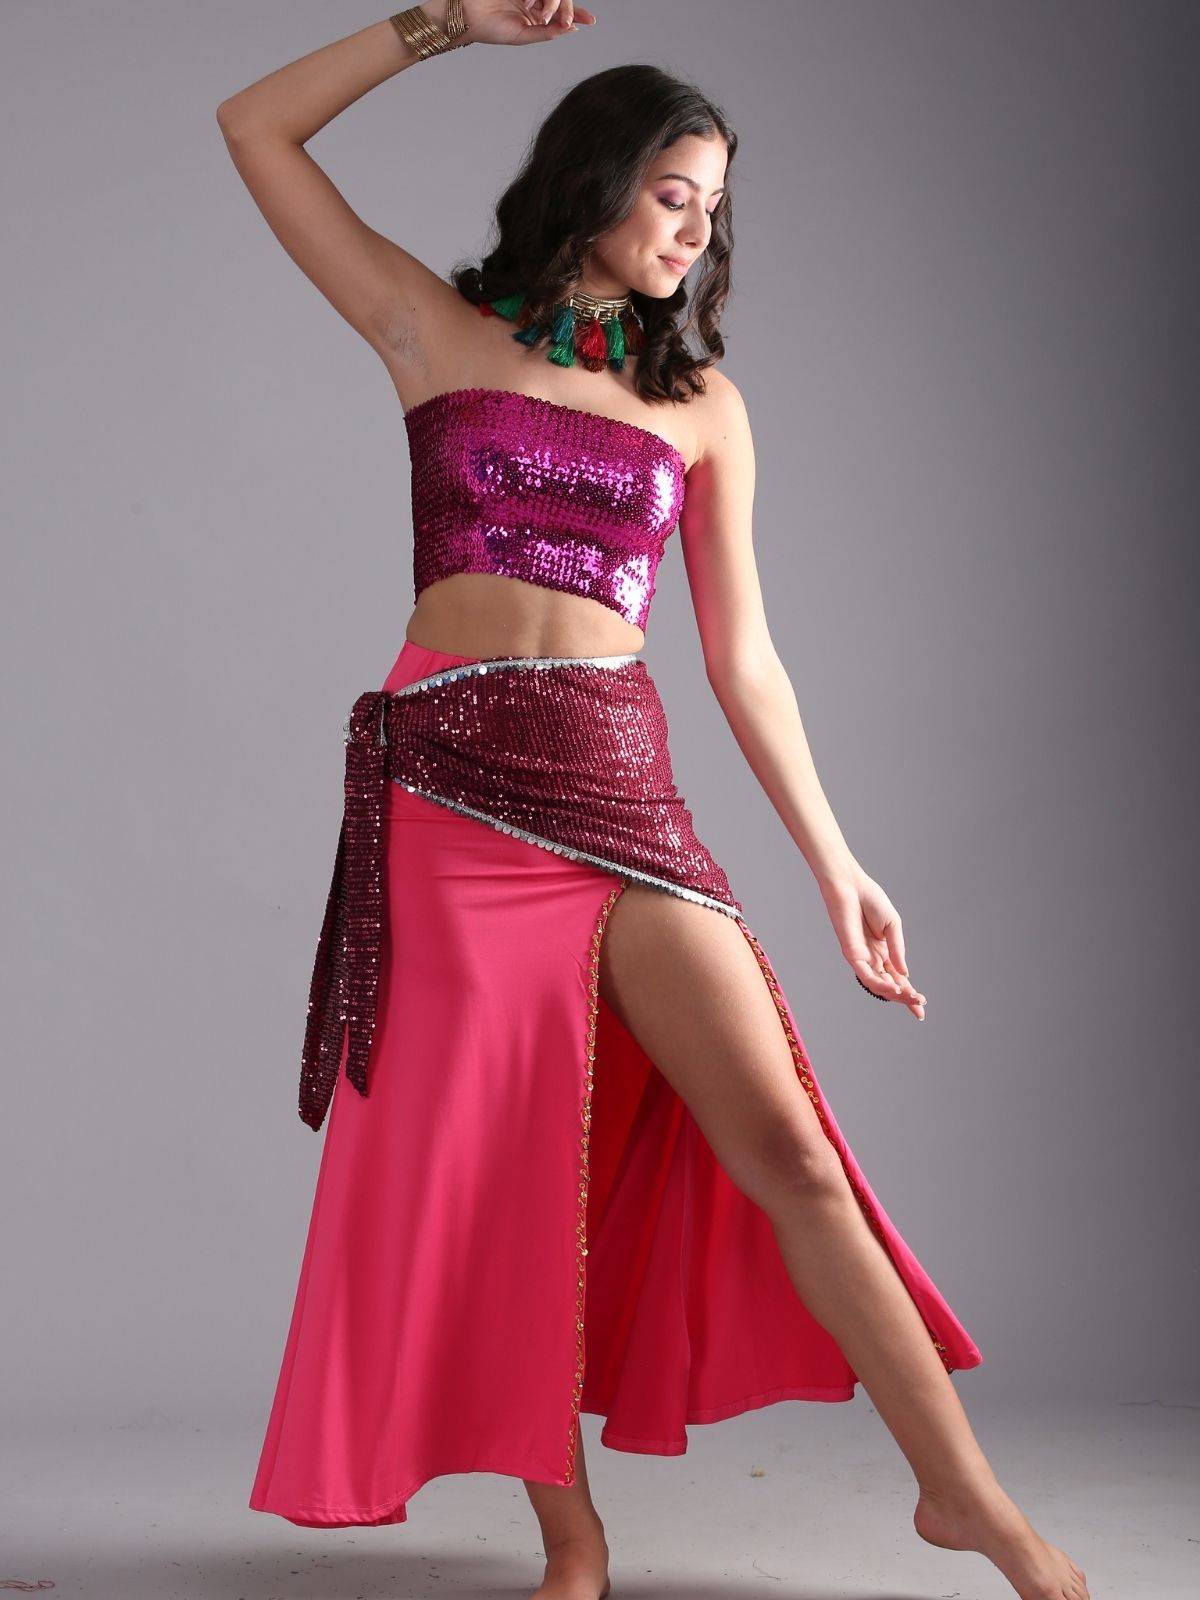 The Dance Bible Belly Dance Coin Harem Pants for Girls and Women